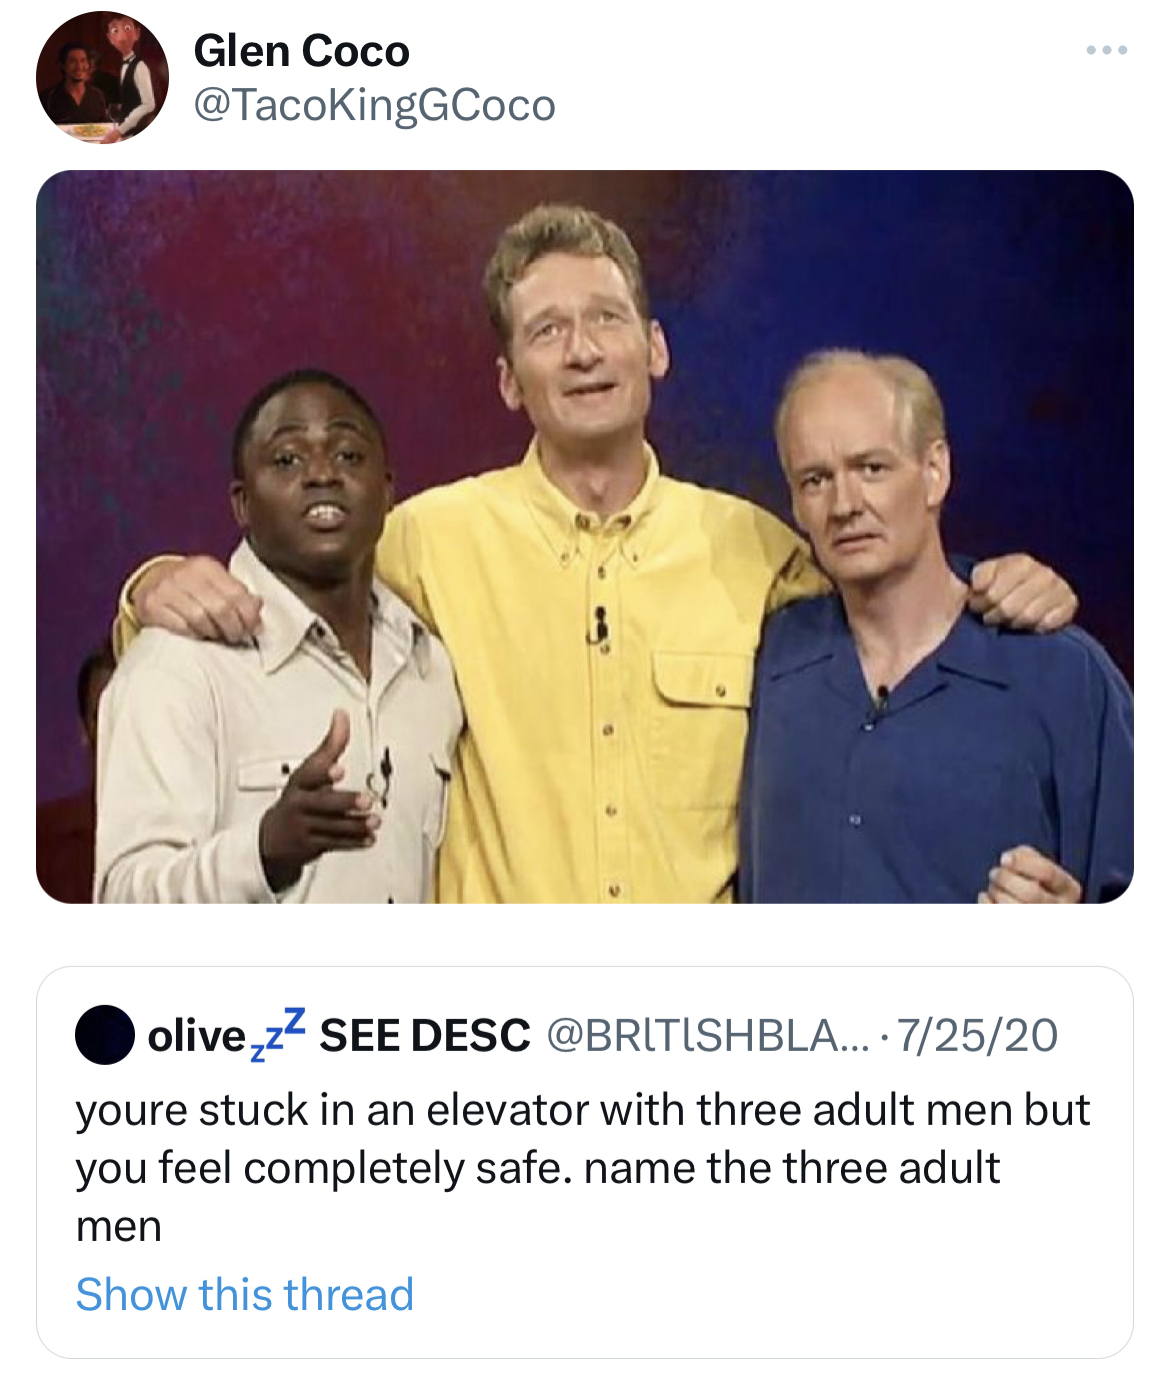 savage tweets - lines is it anyway - Glen Coco olive,z See Desc ... 72520 youre stuck in an elevator with three adult men but you feel completely safe. name the three adult men Show this thread